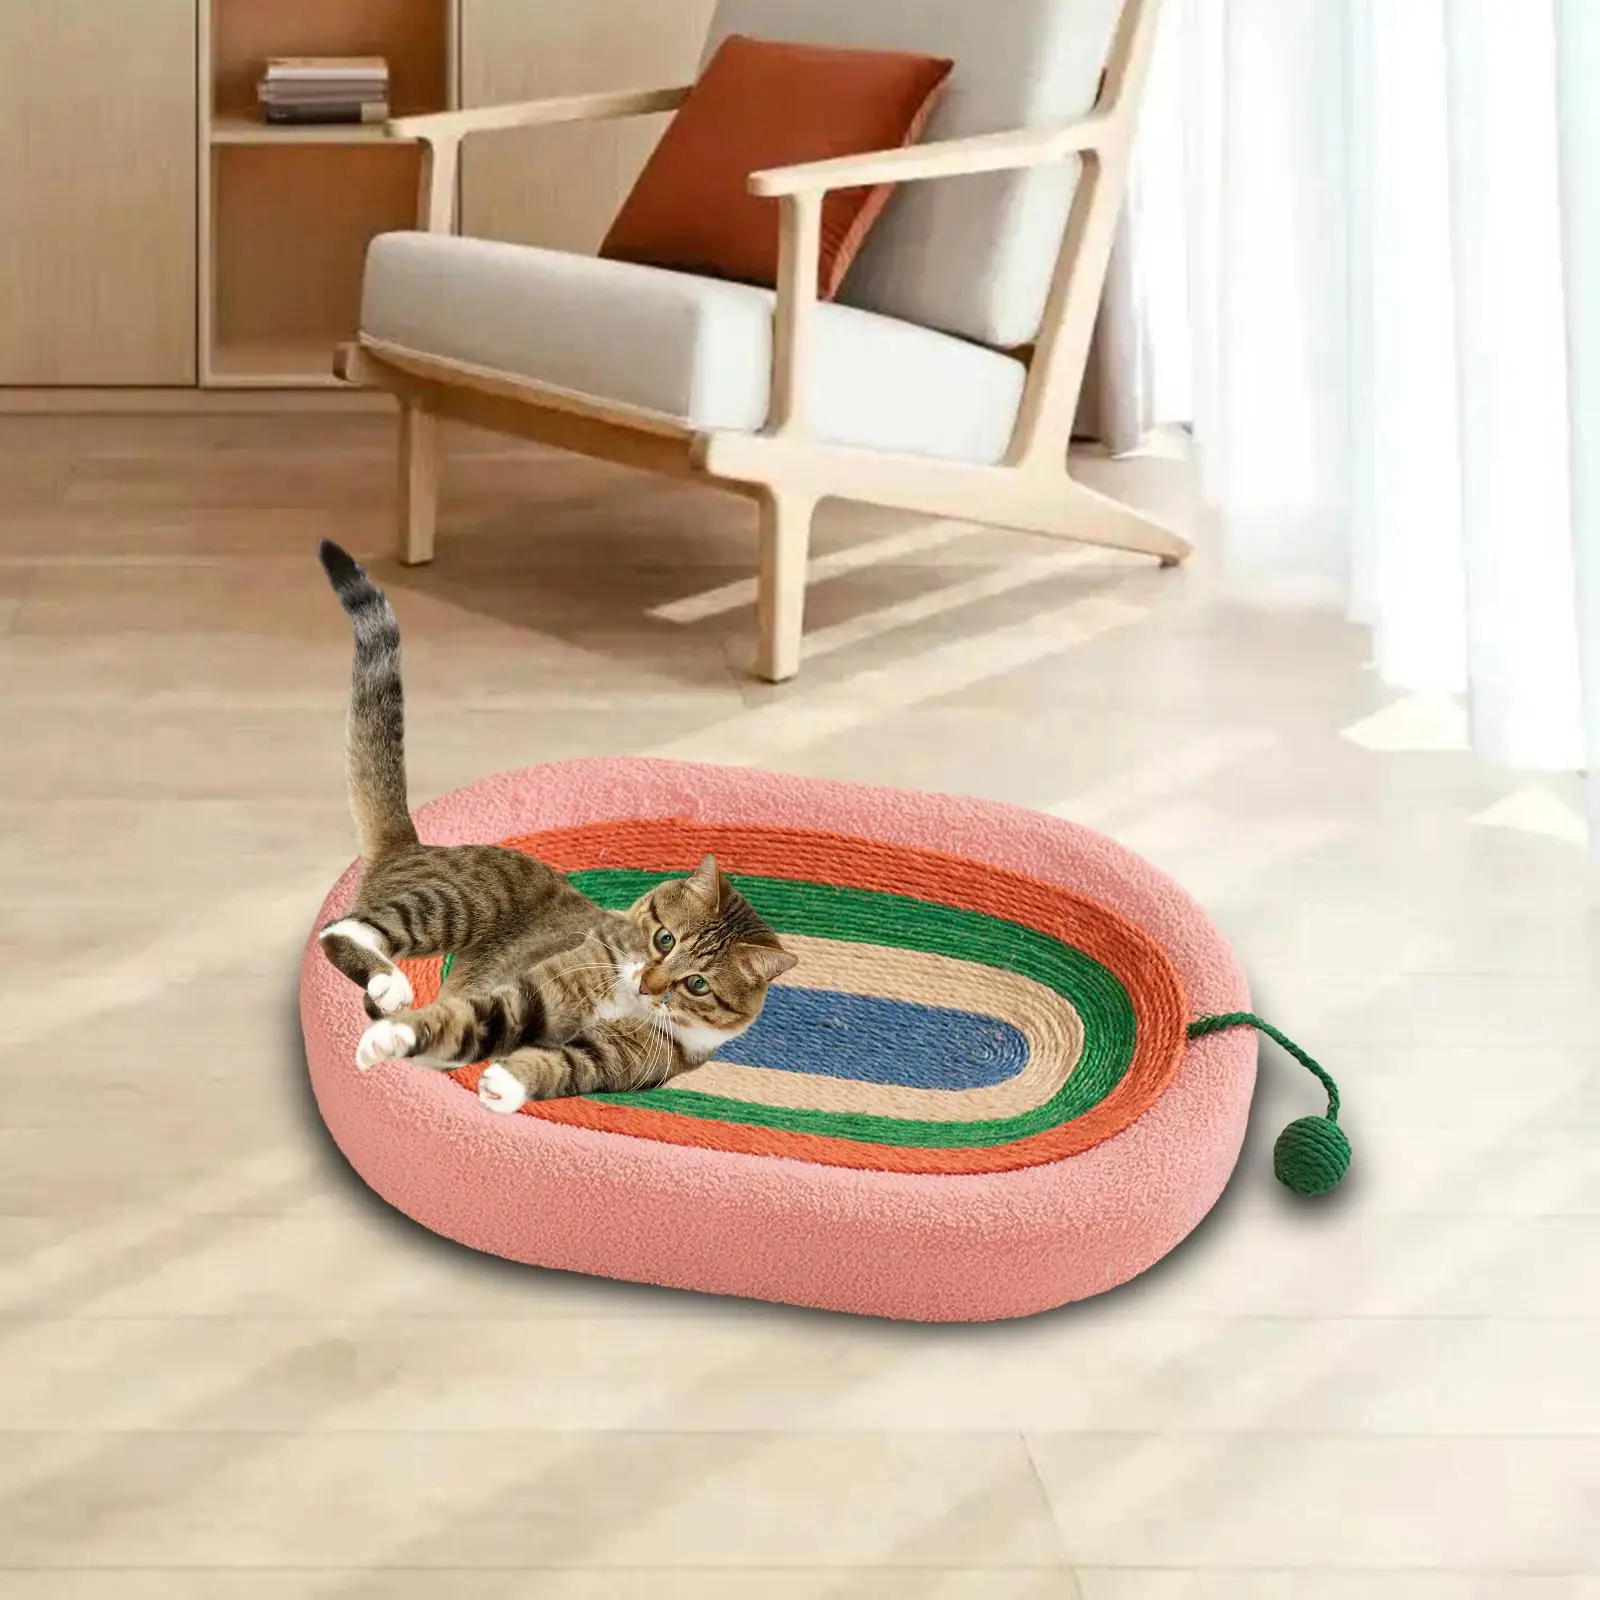 Cat Scratcher Board Lovely Prevents Furniture Damage Wear Resistant Scratch Pad Cat Kitty Training Toy for Furniture Protection